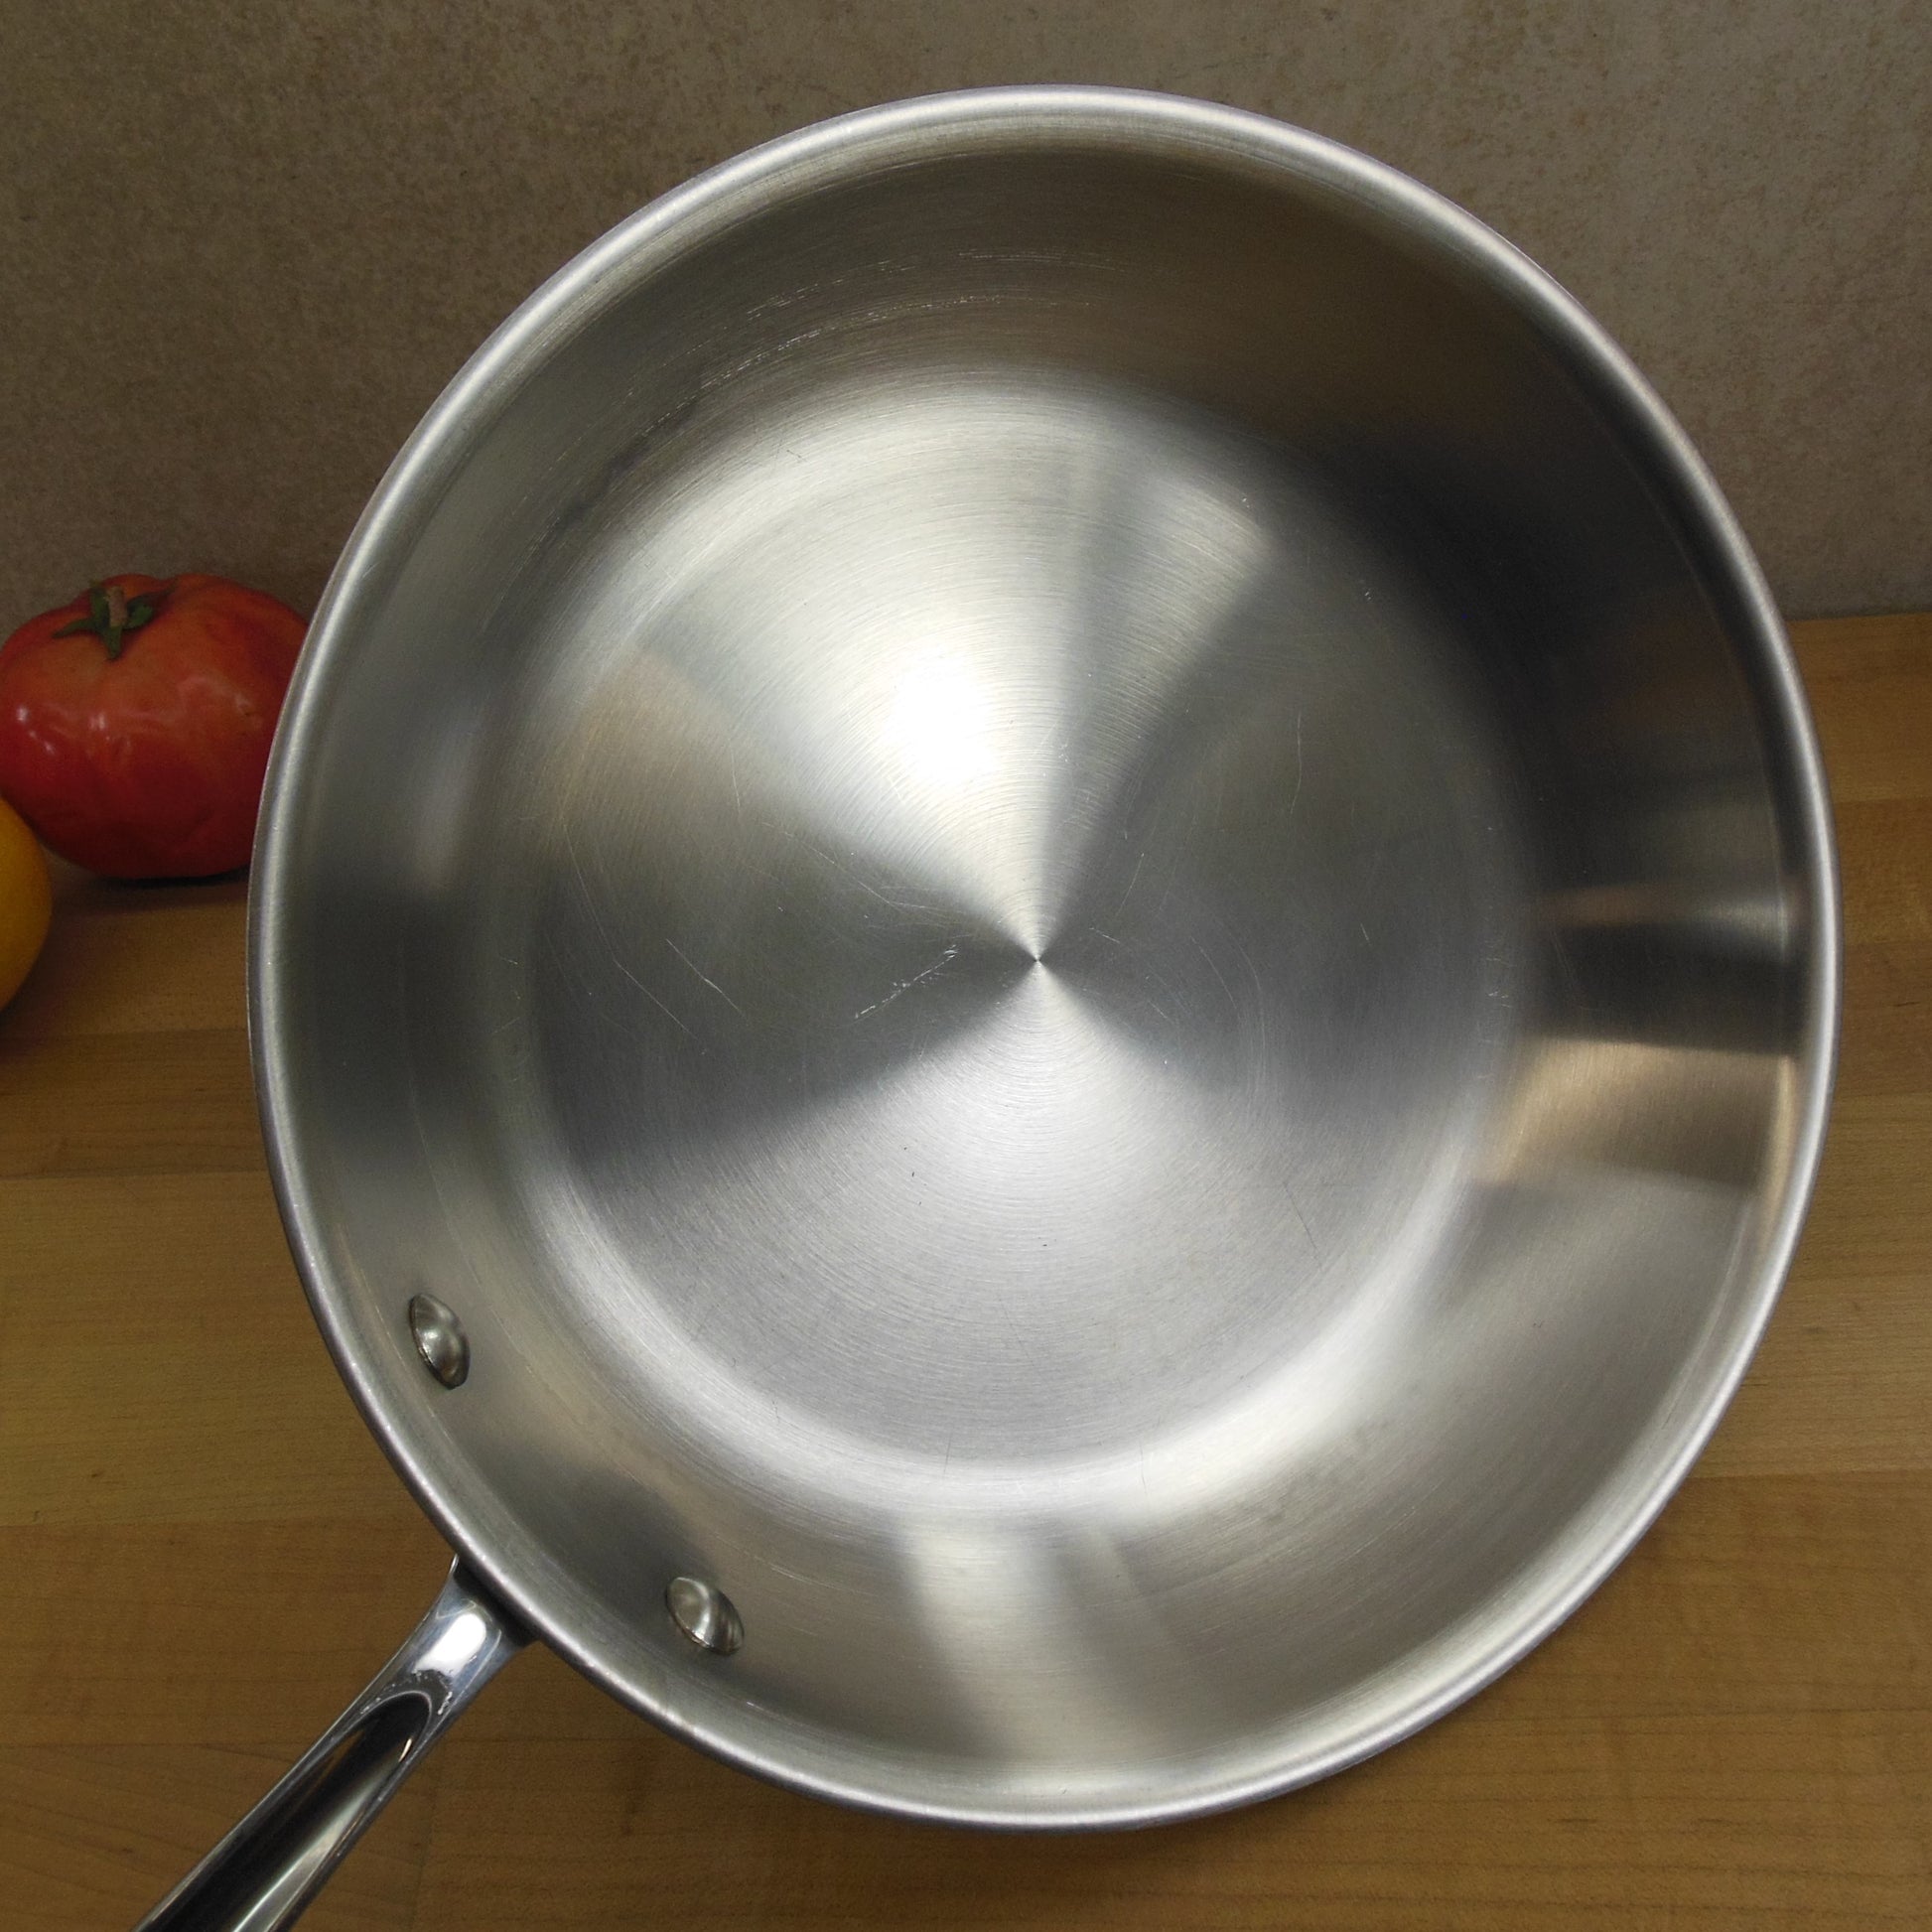 All-Clad USA Metal Crafters MC2 10" Fry Pan Skillet Used